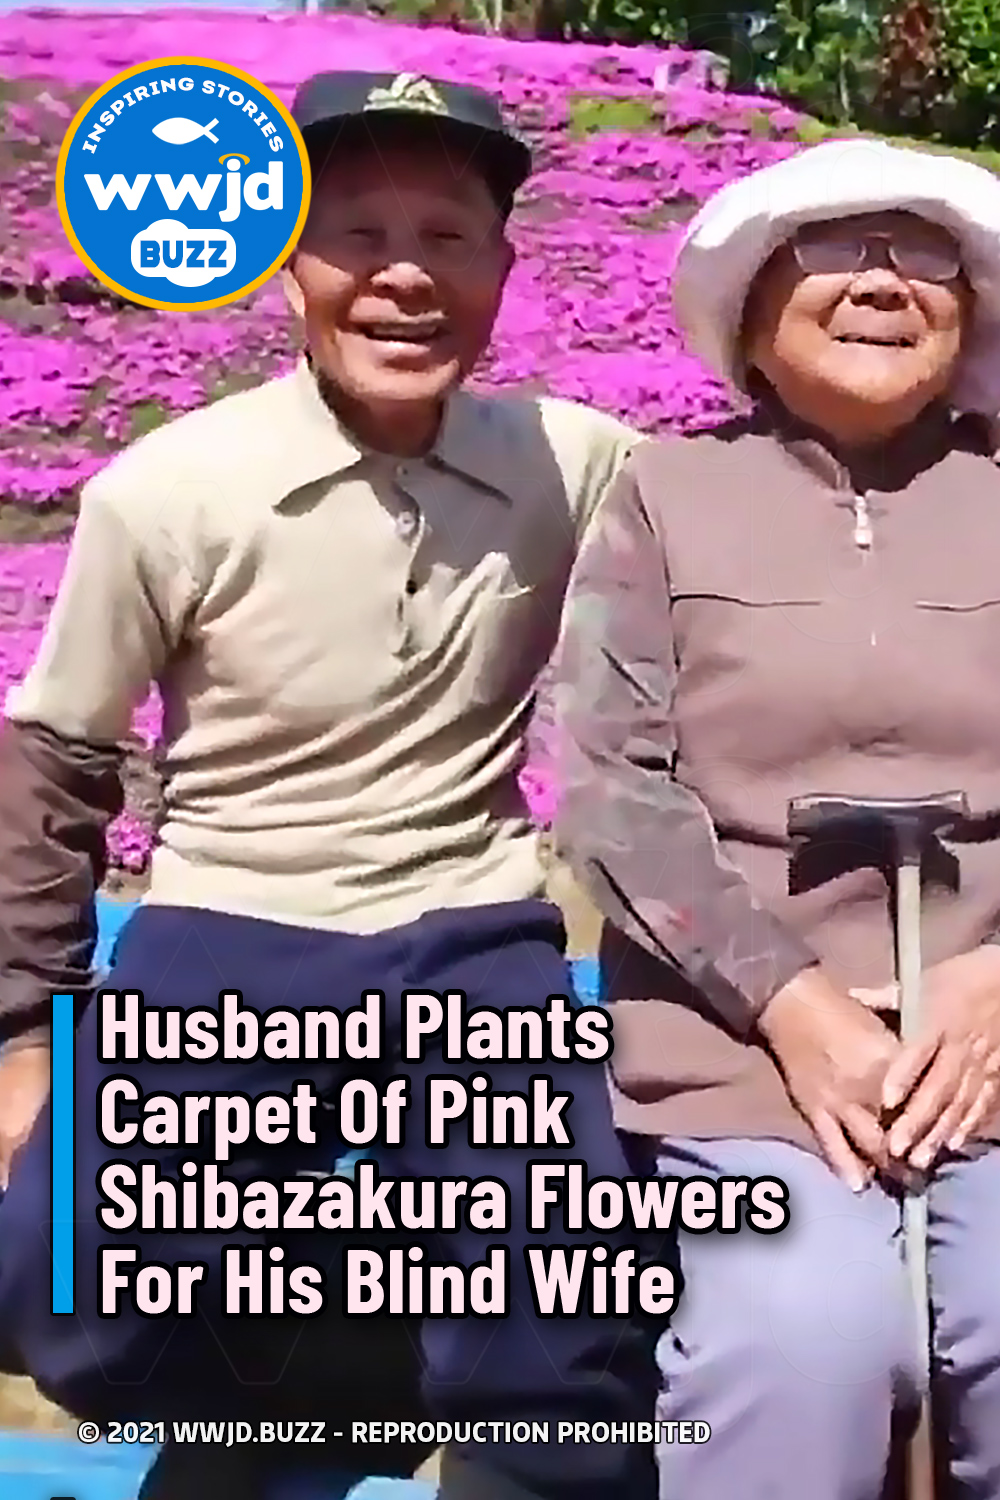 Husband Plants Carpet Of Pink Shibazakura Flowers For His Blind Wife